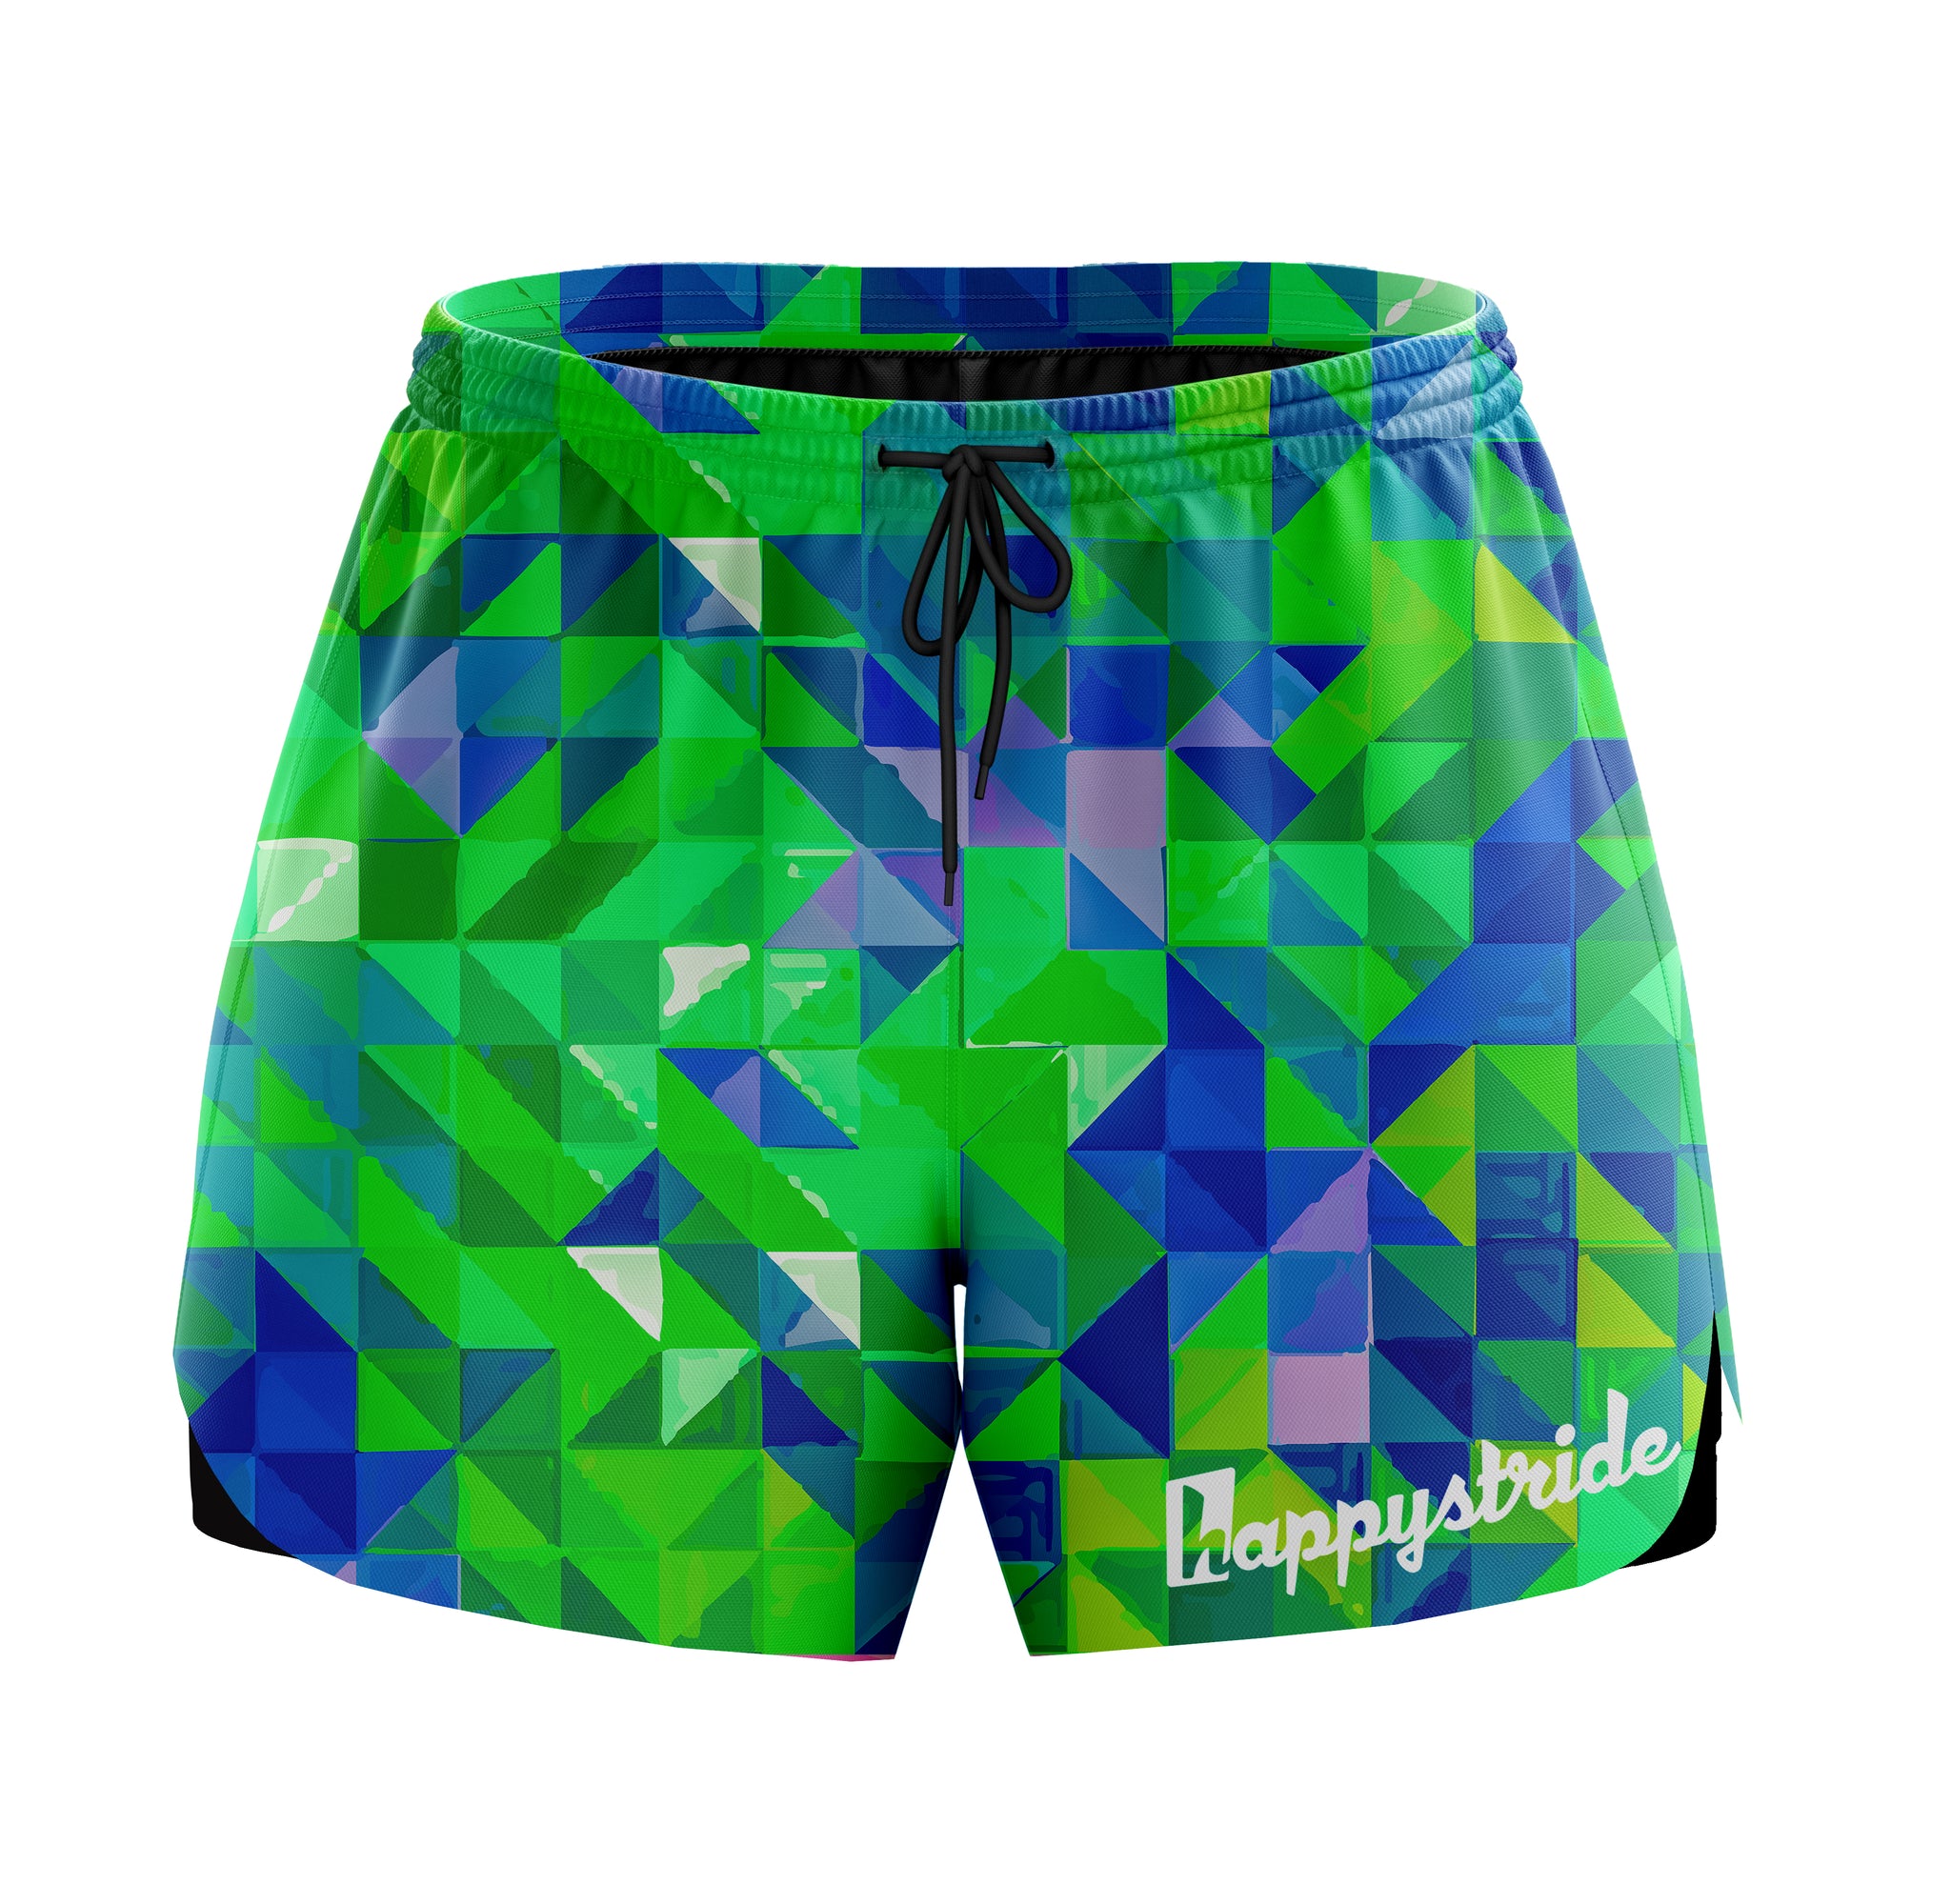 Neo geometric'' cool colourful fun bright unisex 2-in-1 running & fitness  shorts – Happystride